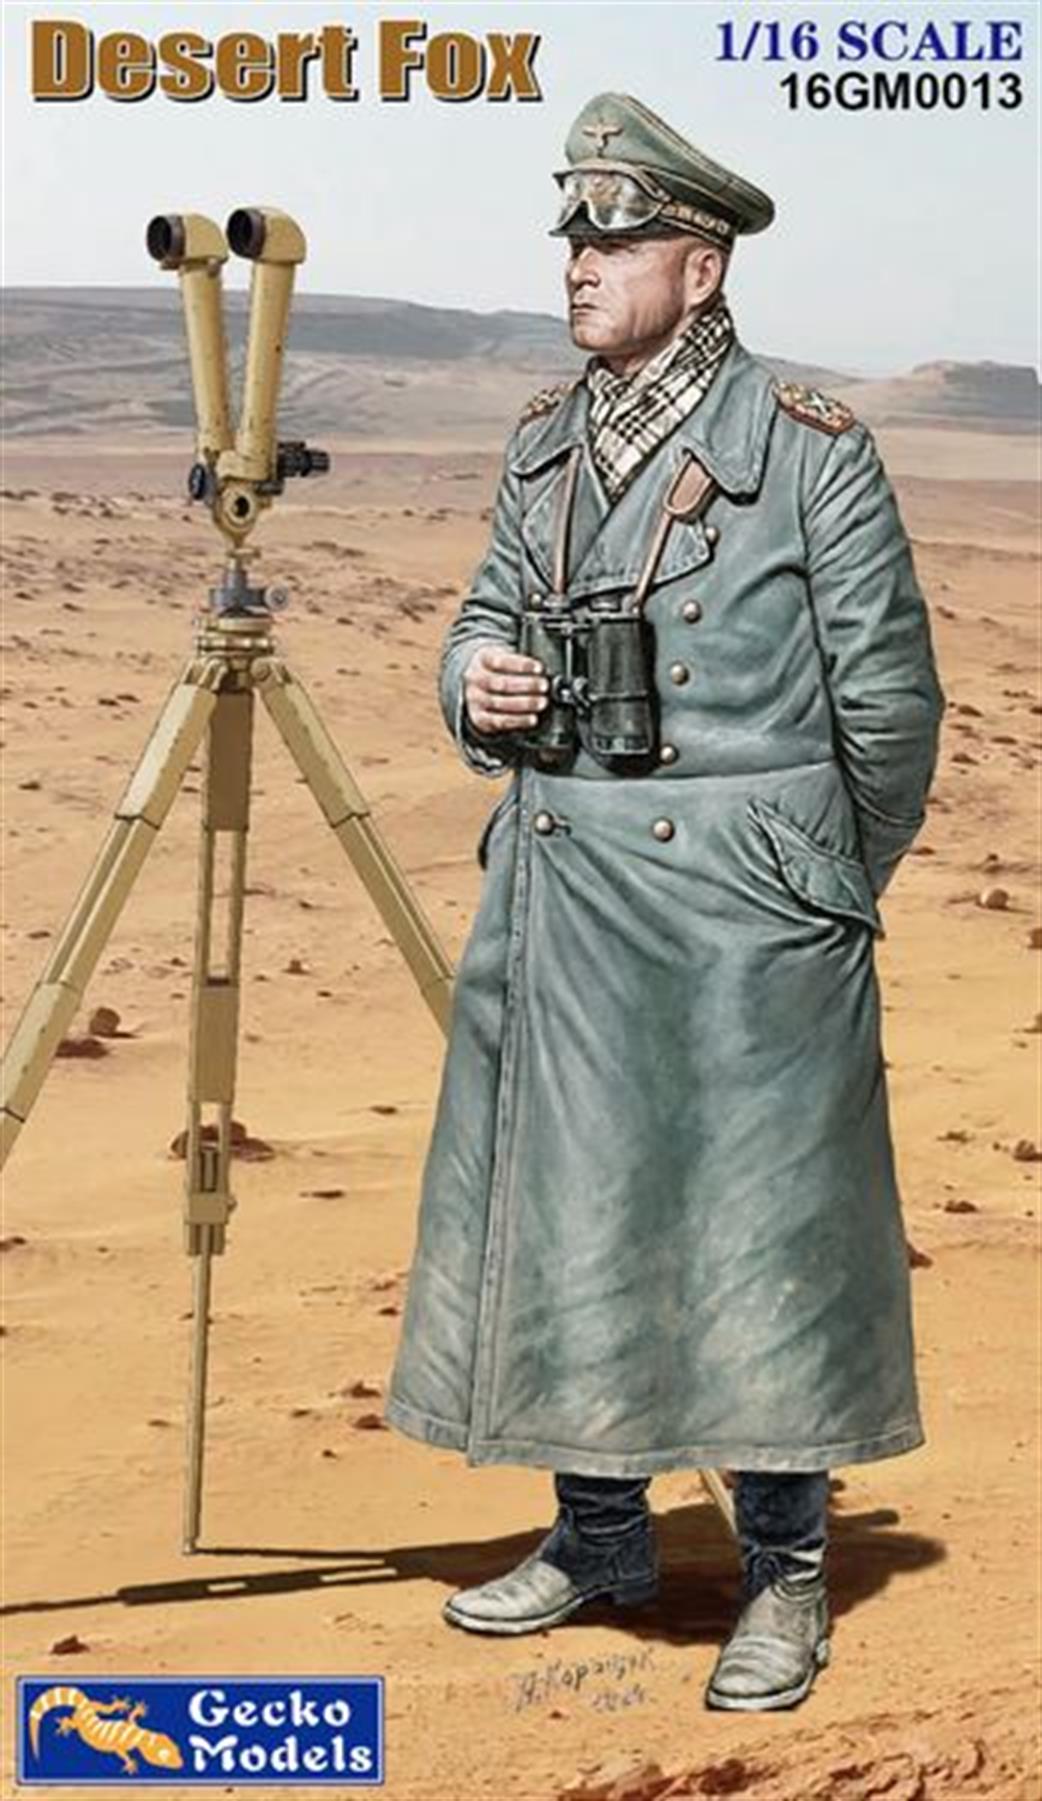 Gecko Models 1/16 16GM0013 Desert Fox figure kit included the trench periscope component parts